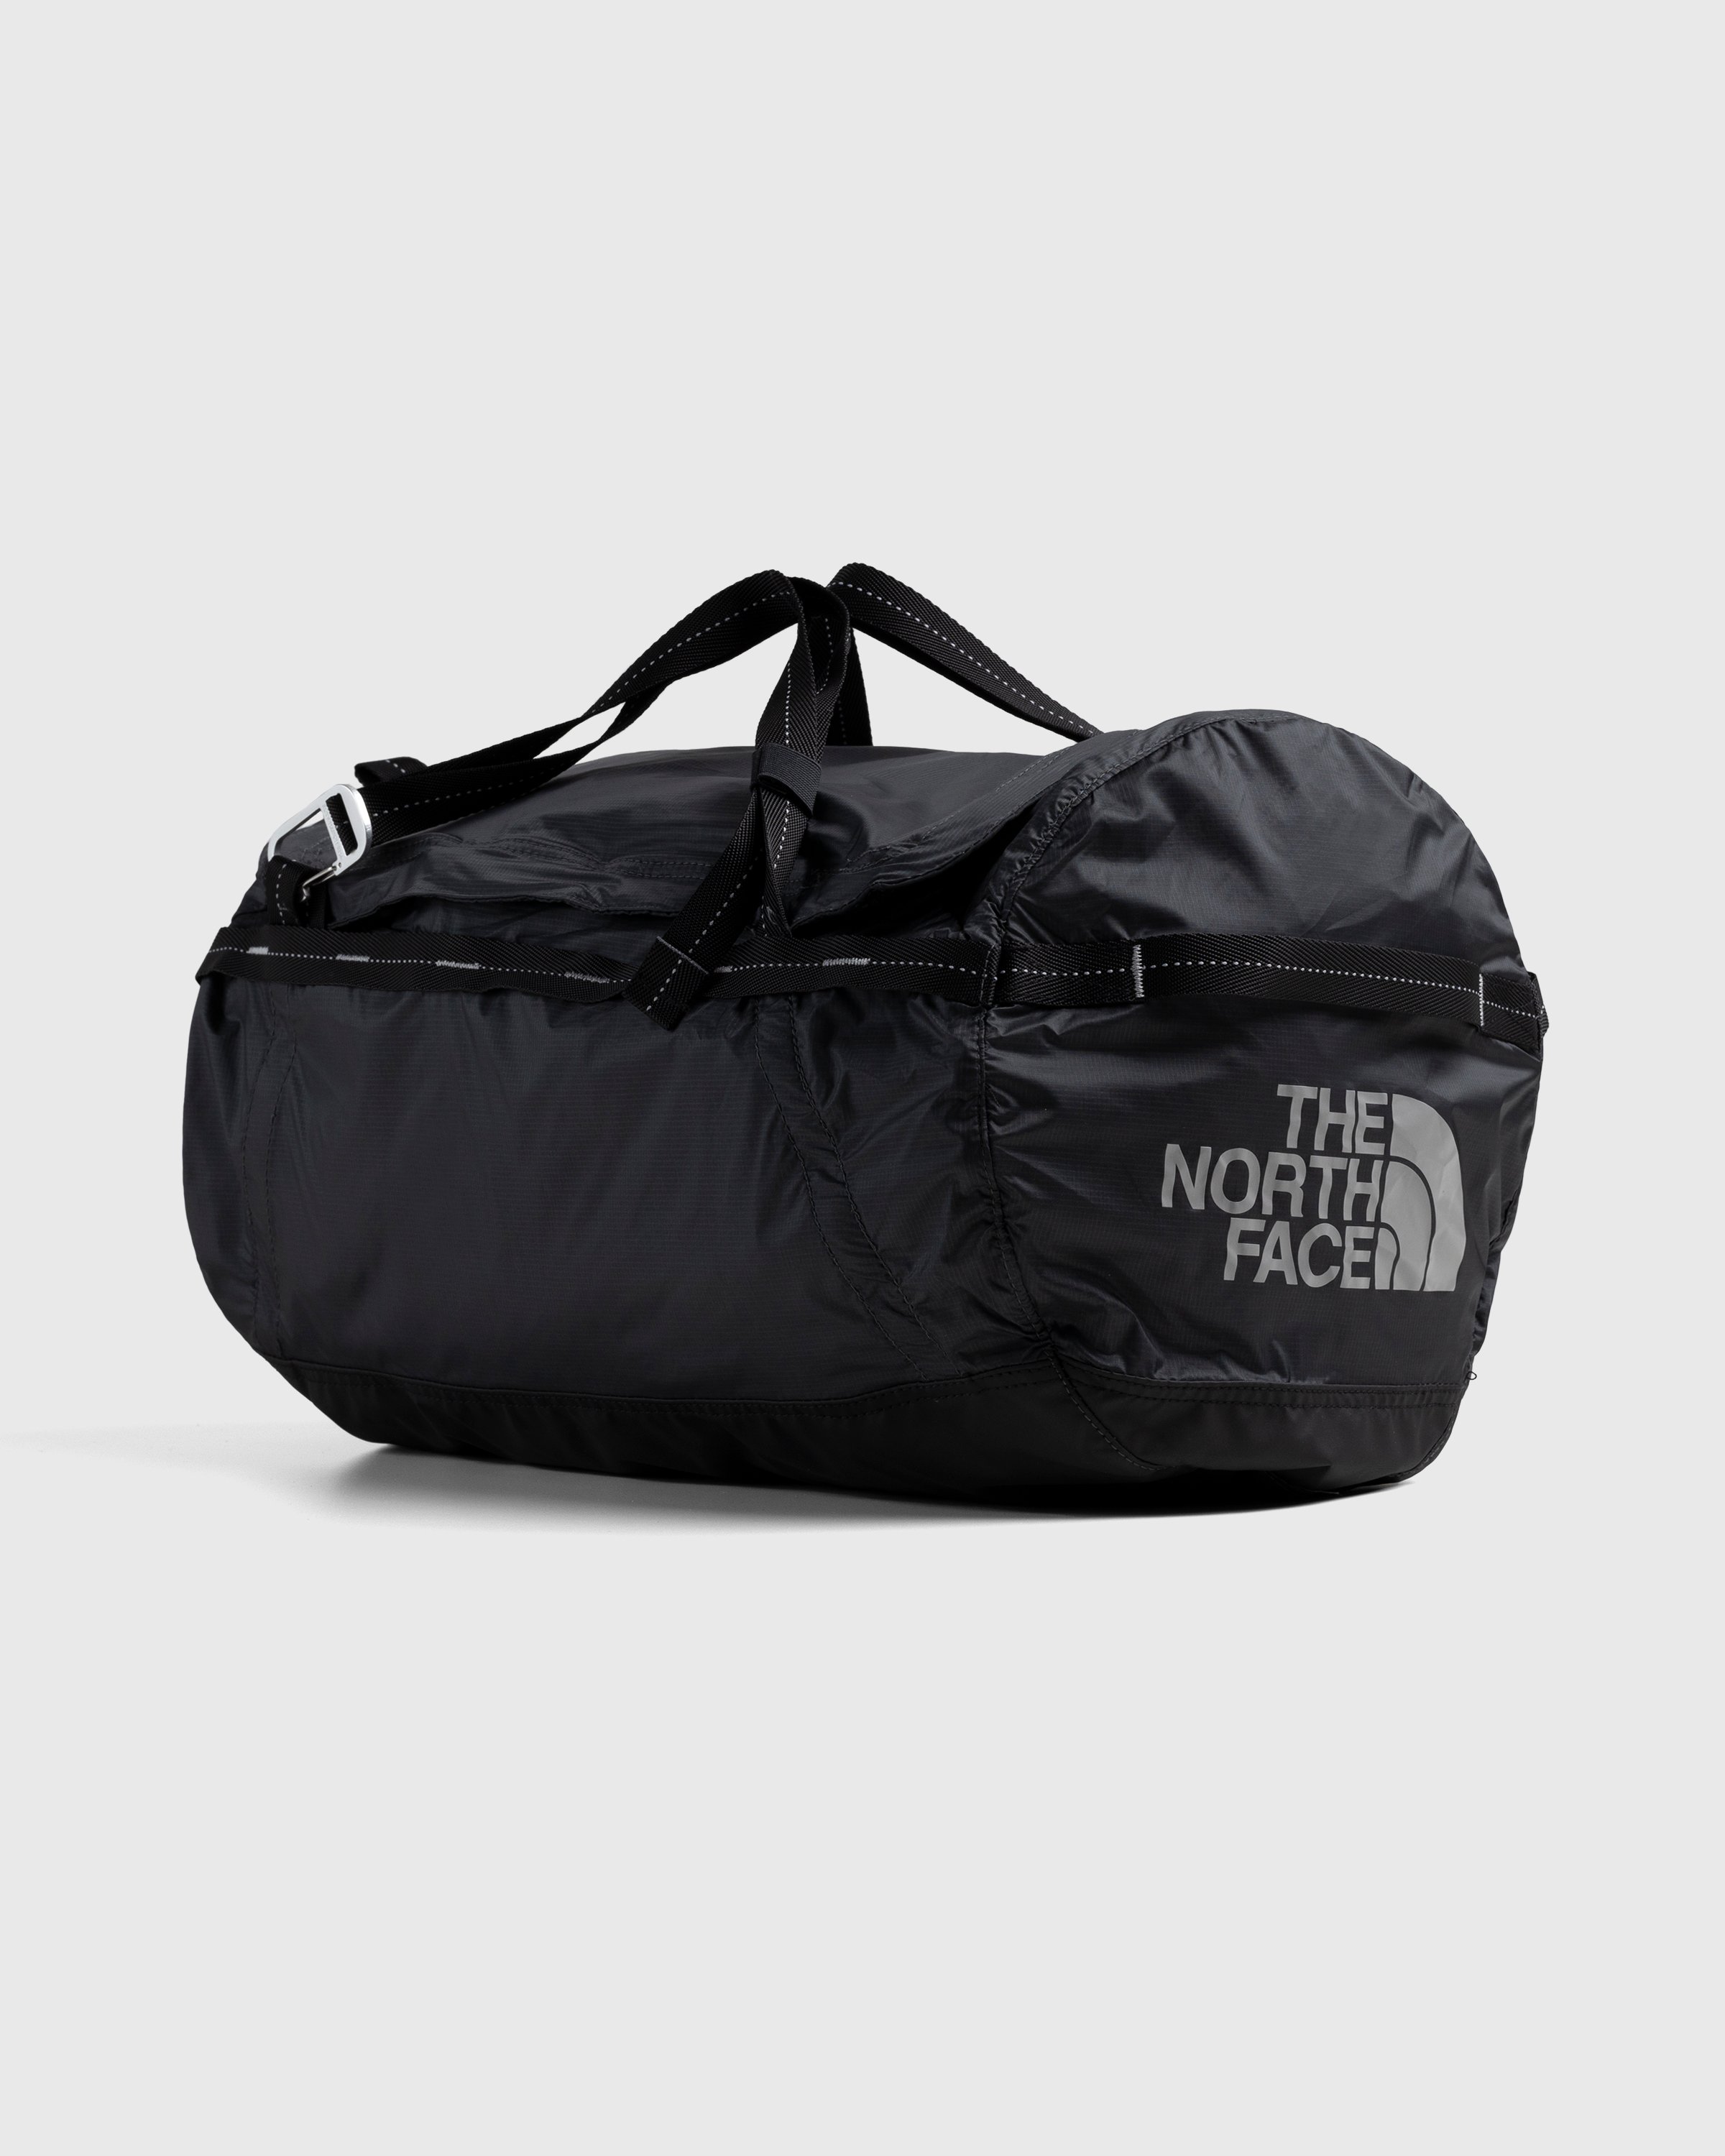 The North Face - Flyweight Duffel Grey/Black - Accessories - Grey - Image 1